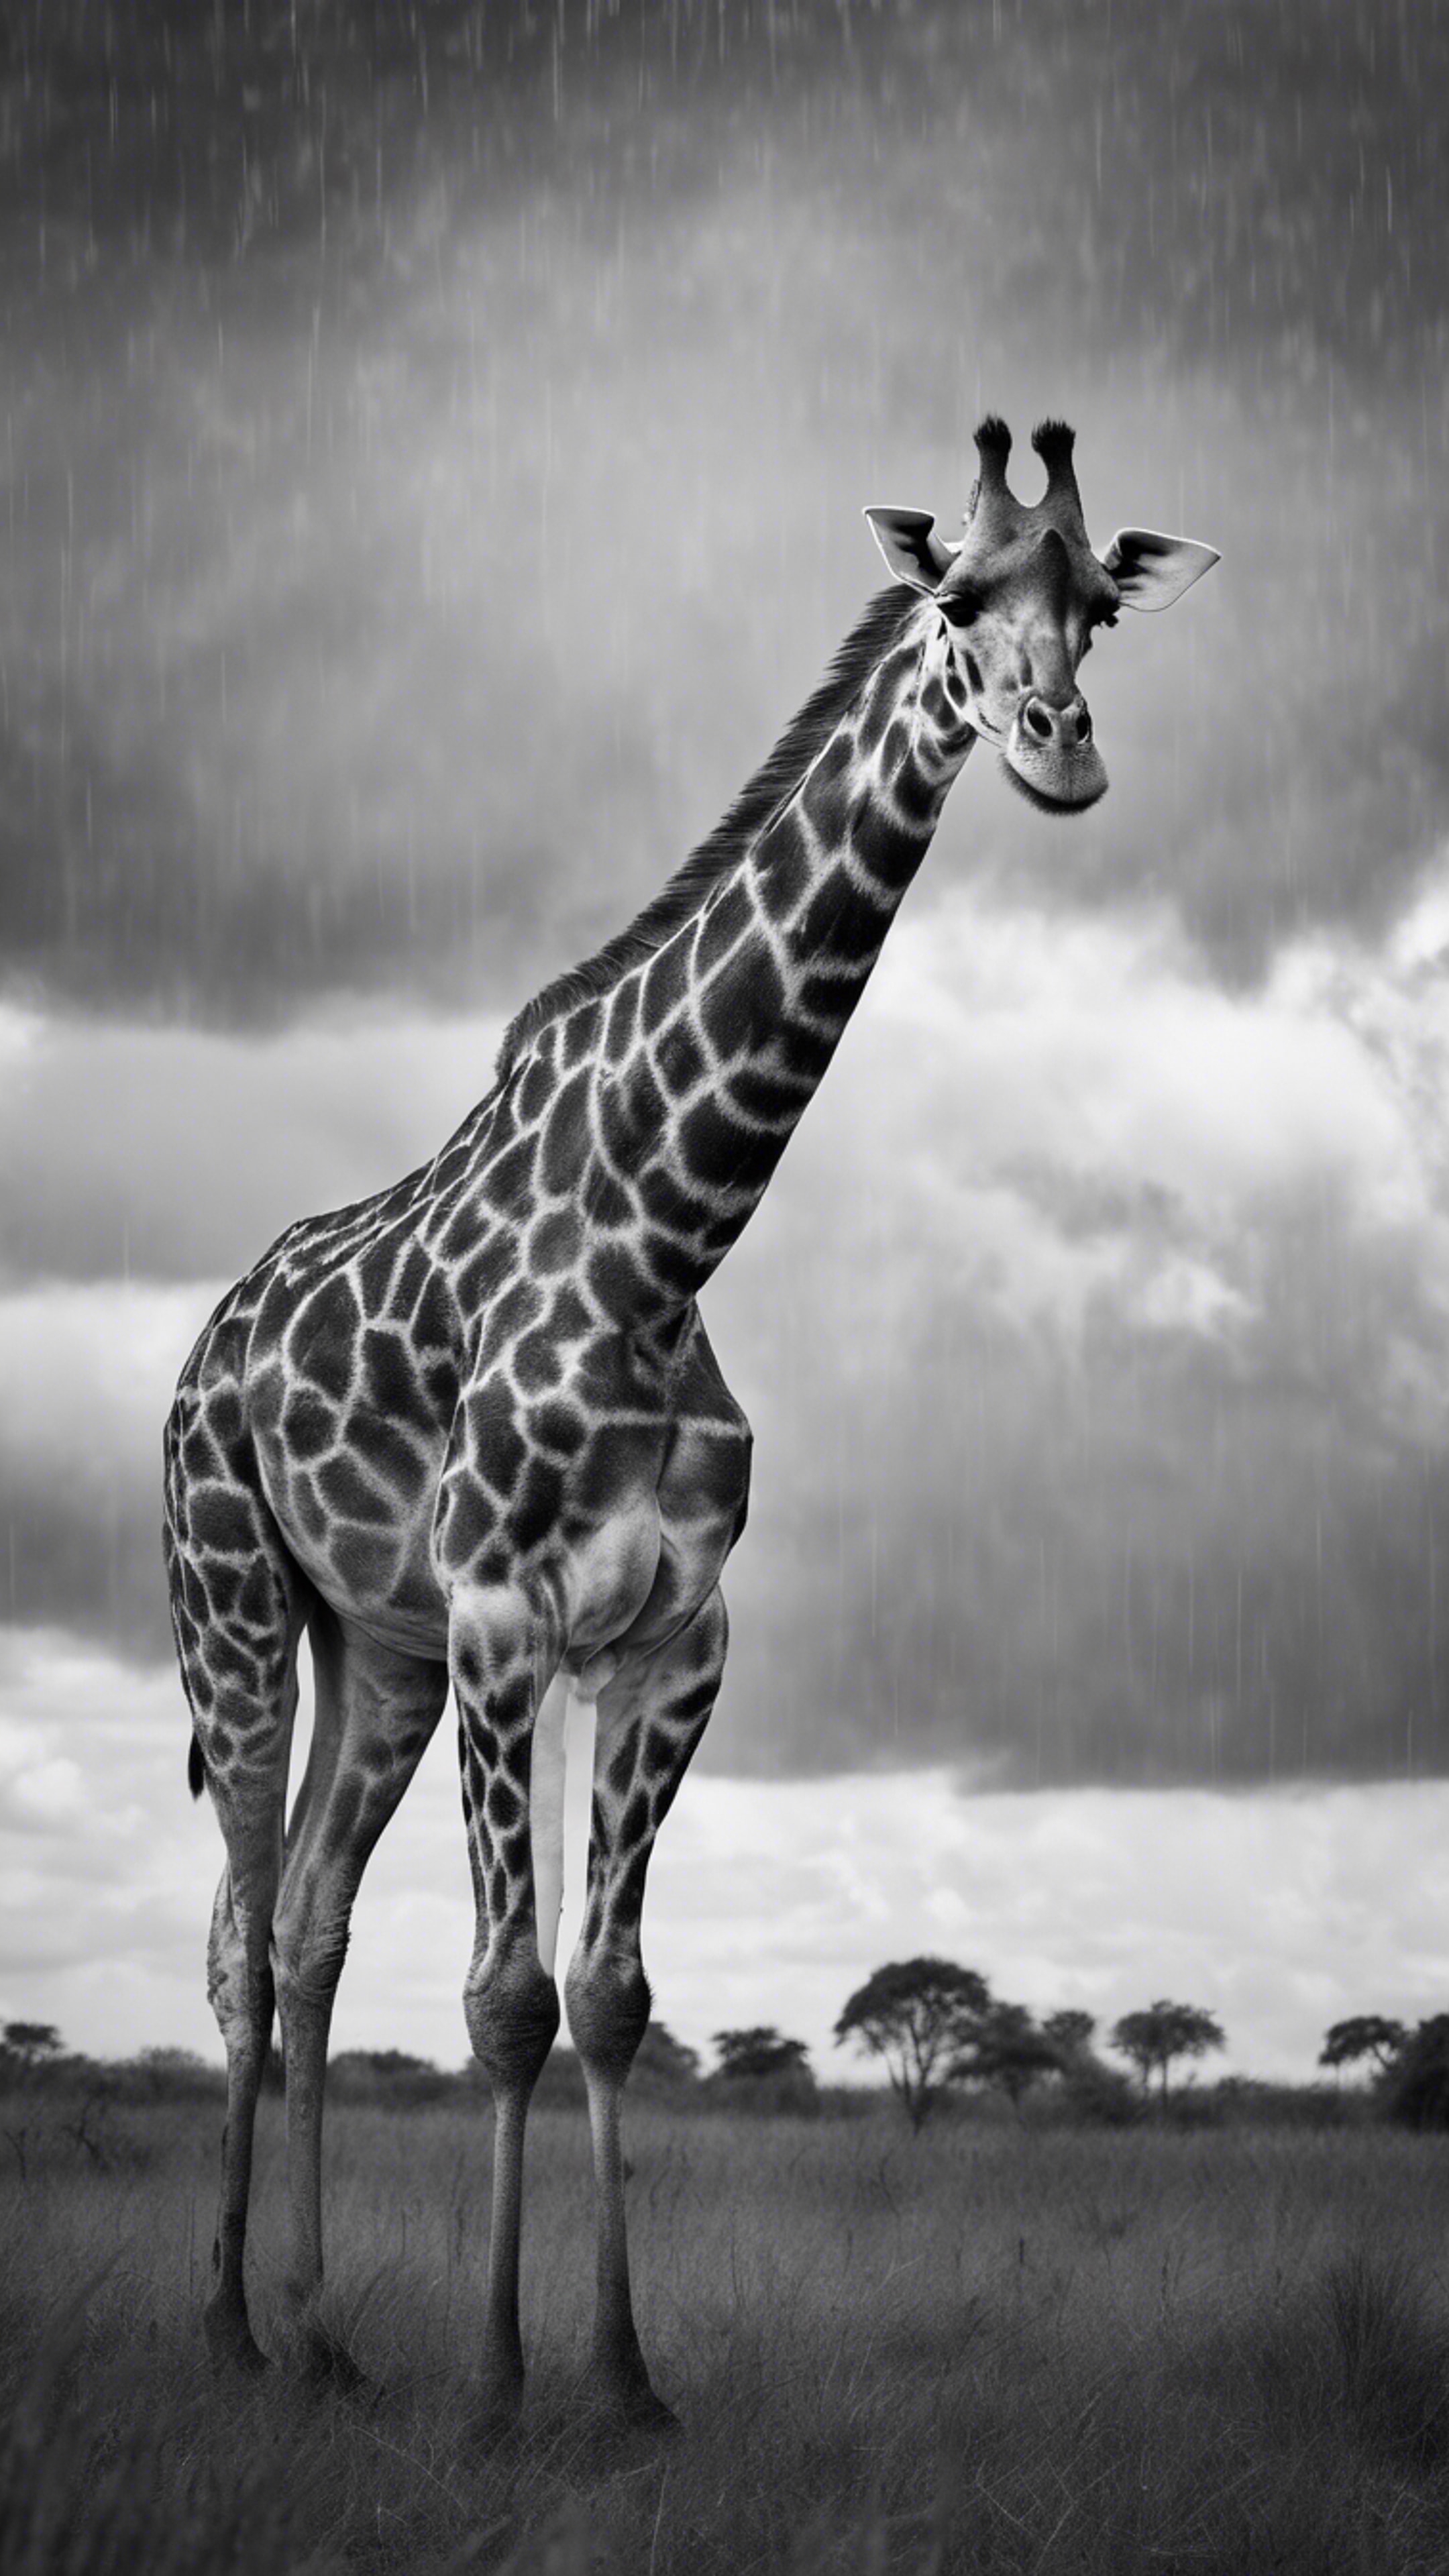 A beautifully photographed black and white image of a giraffe sauntering under rain clouds. טפט[33f5eecce55b4c40952e]